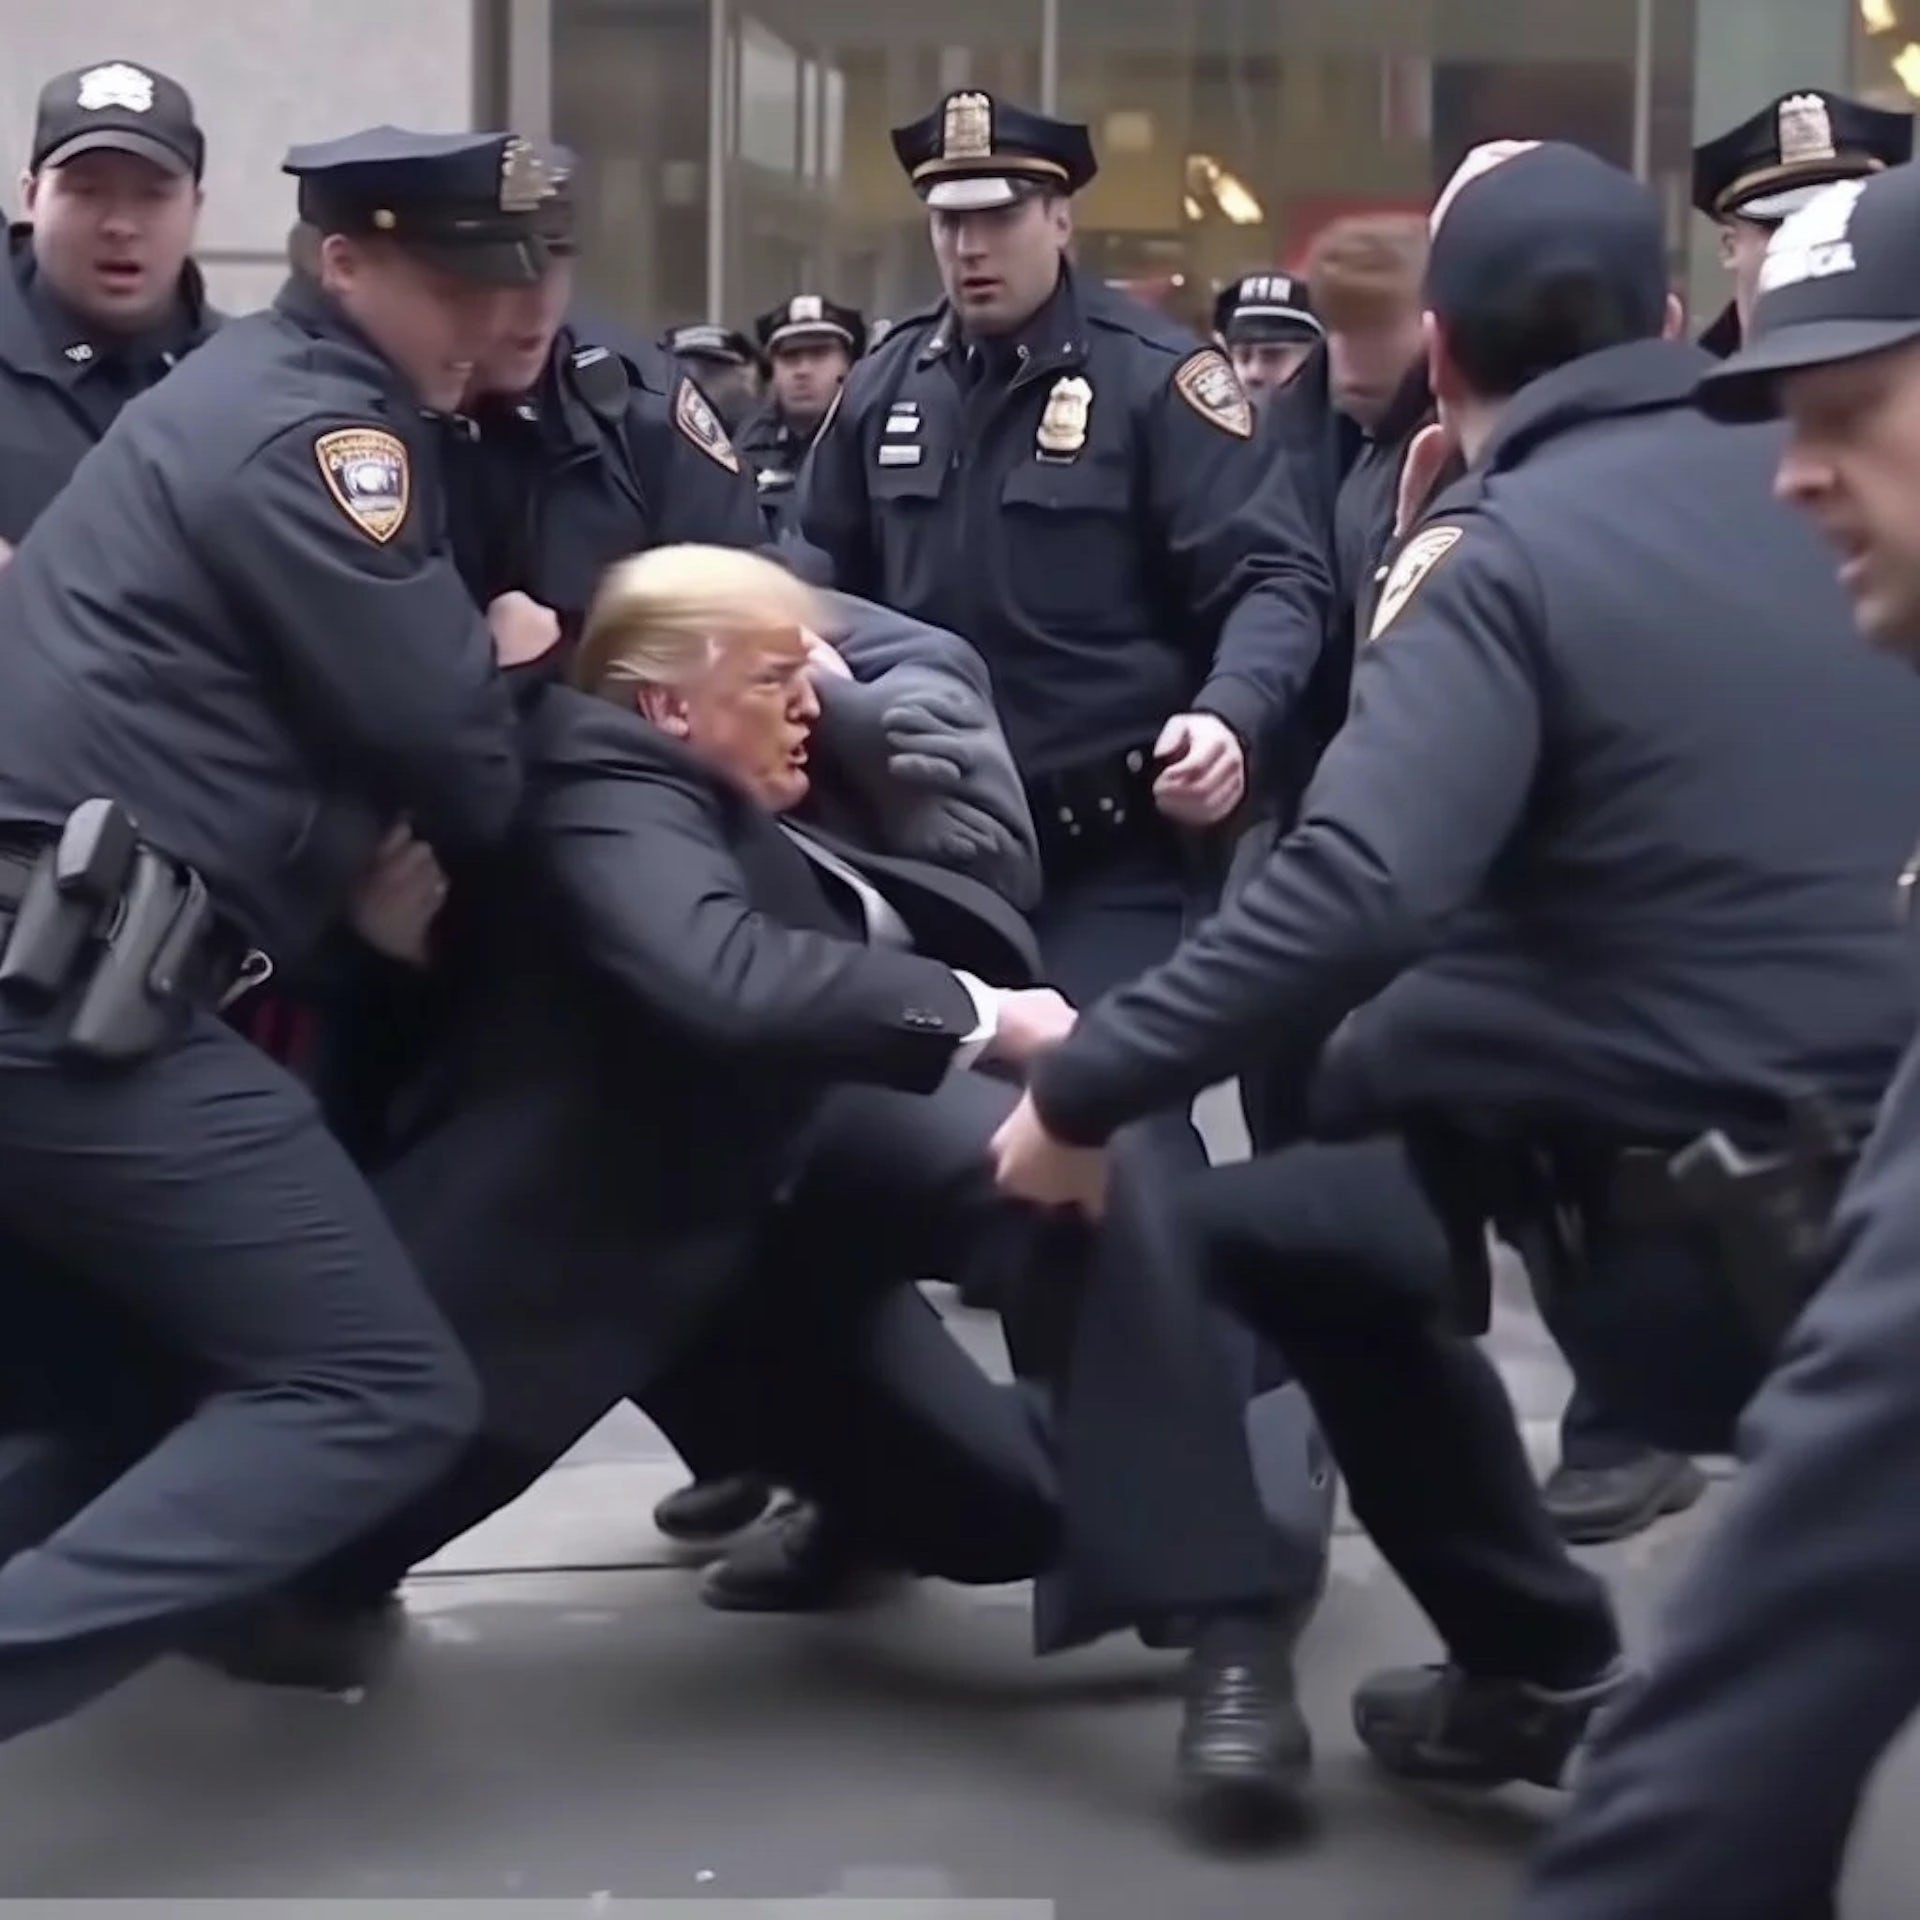 A number of fake images of former US President Donald Trump being arrested have taken the internet by storm.